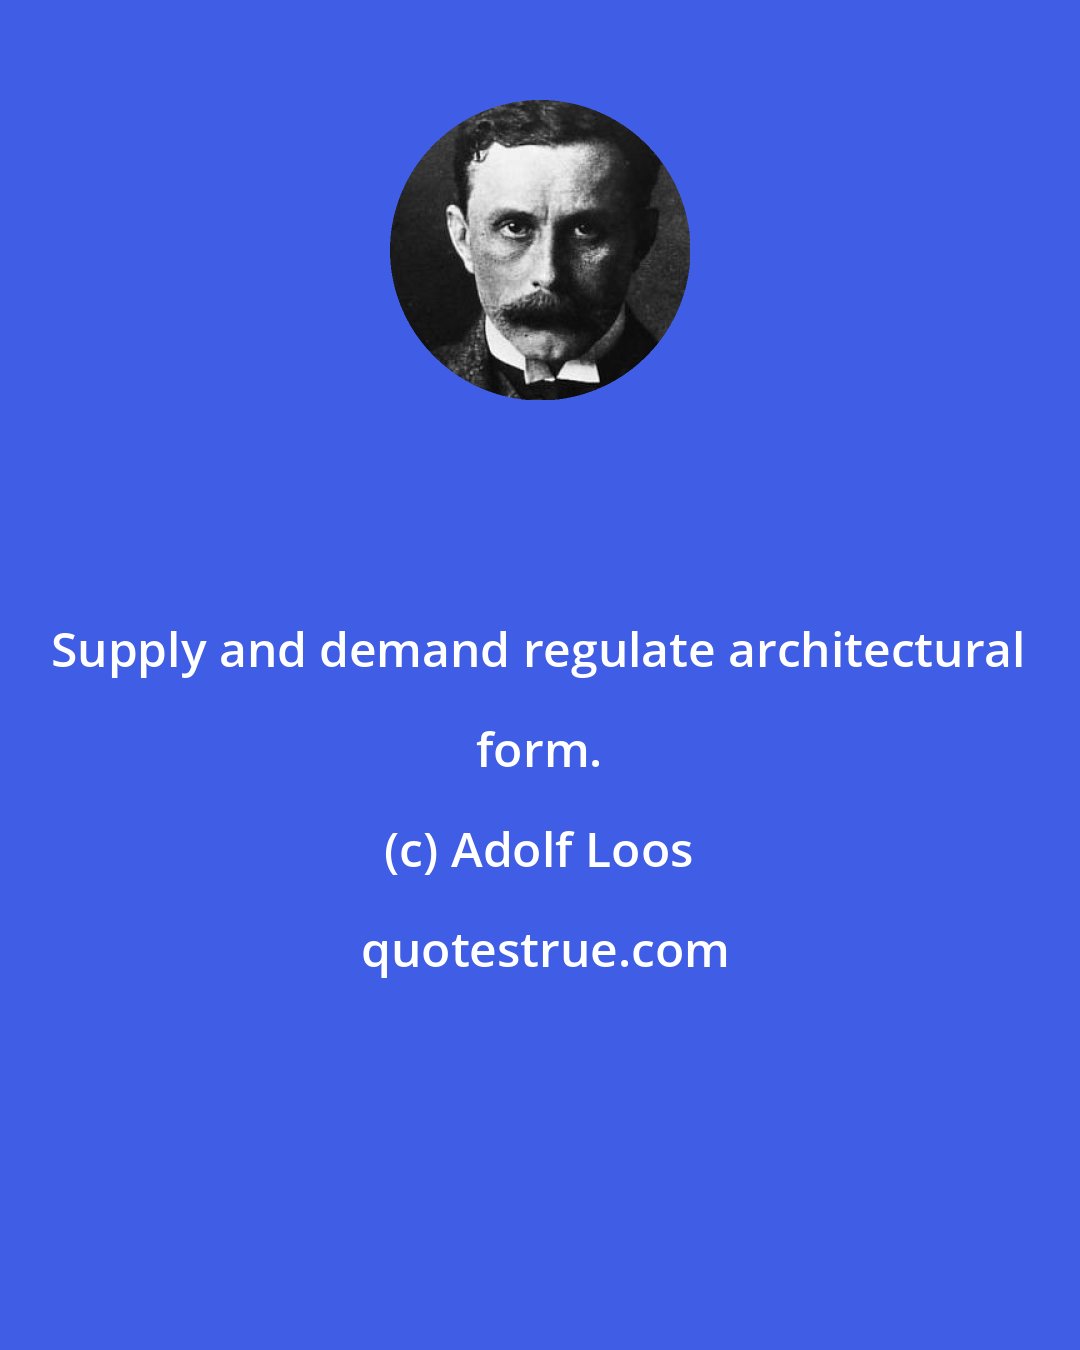 Adolf Loos: Supply and demand regulate architectural form.